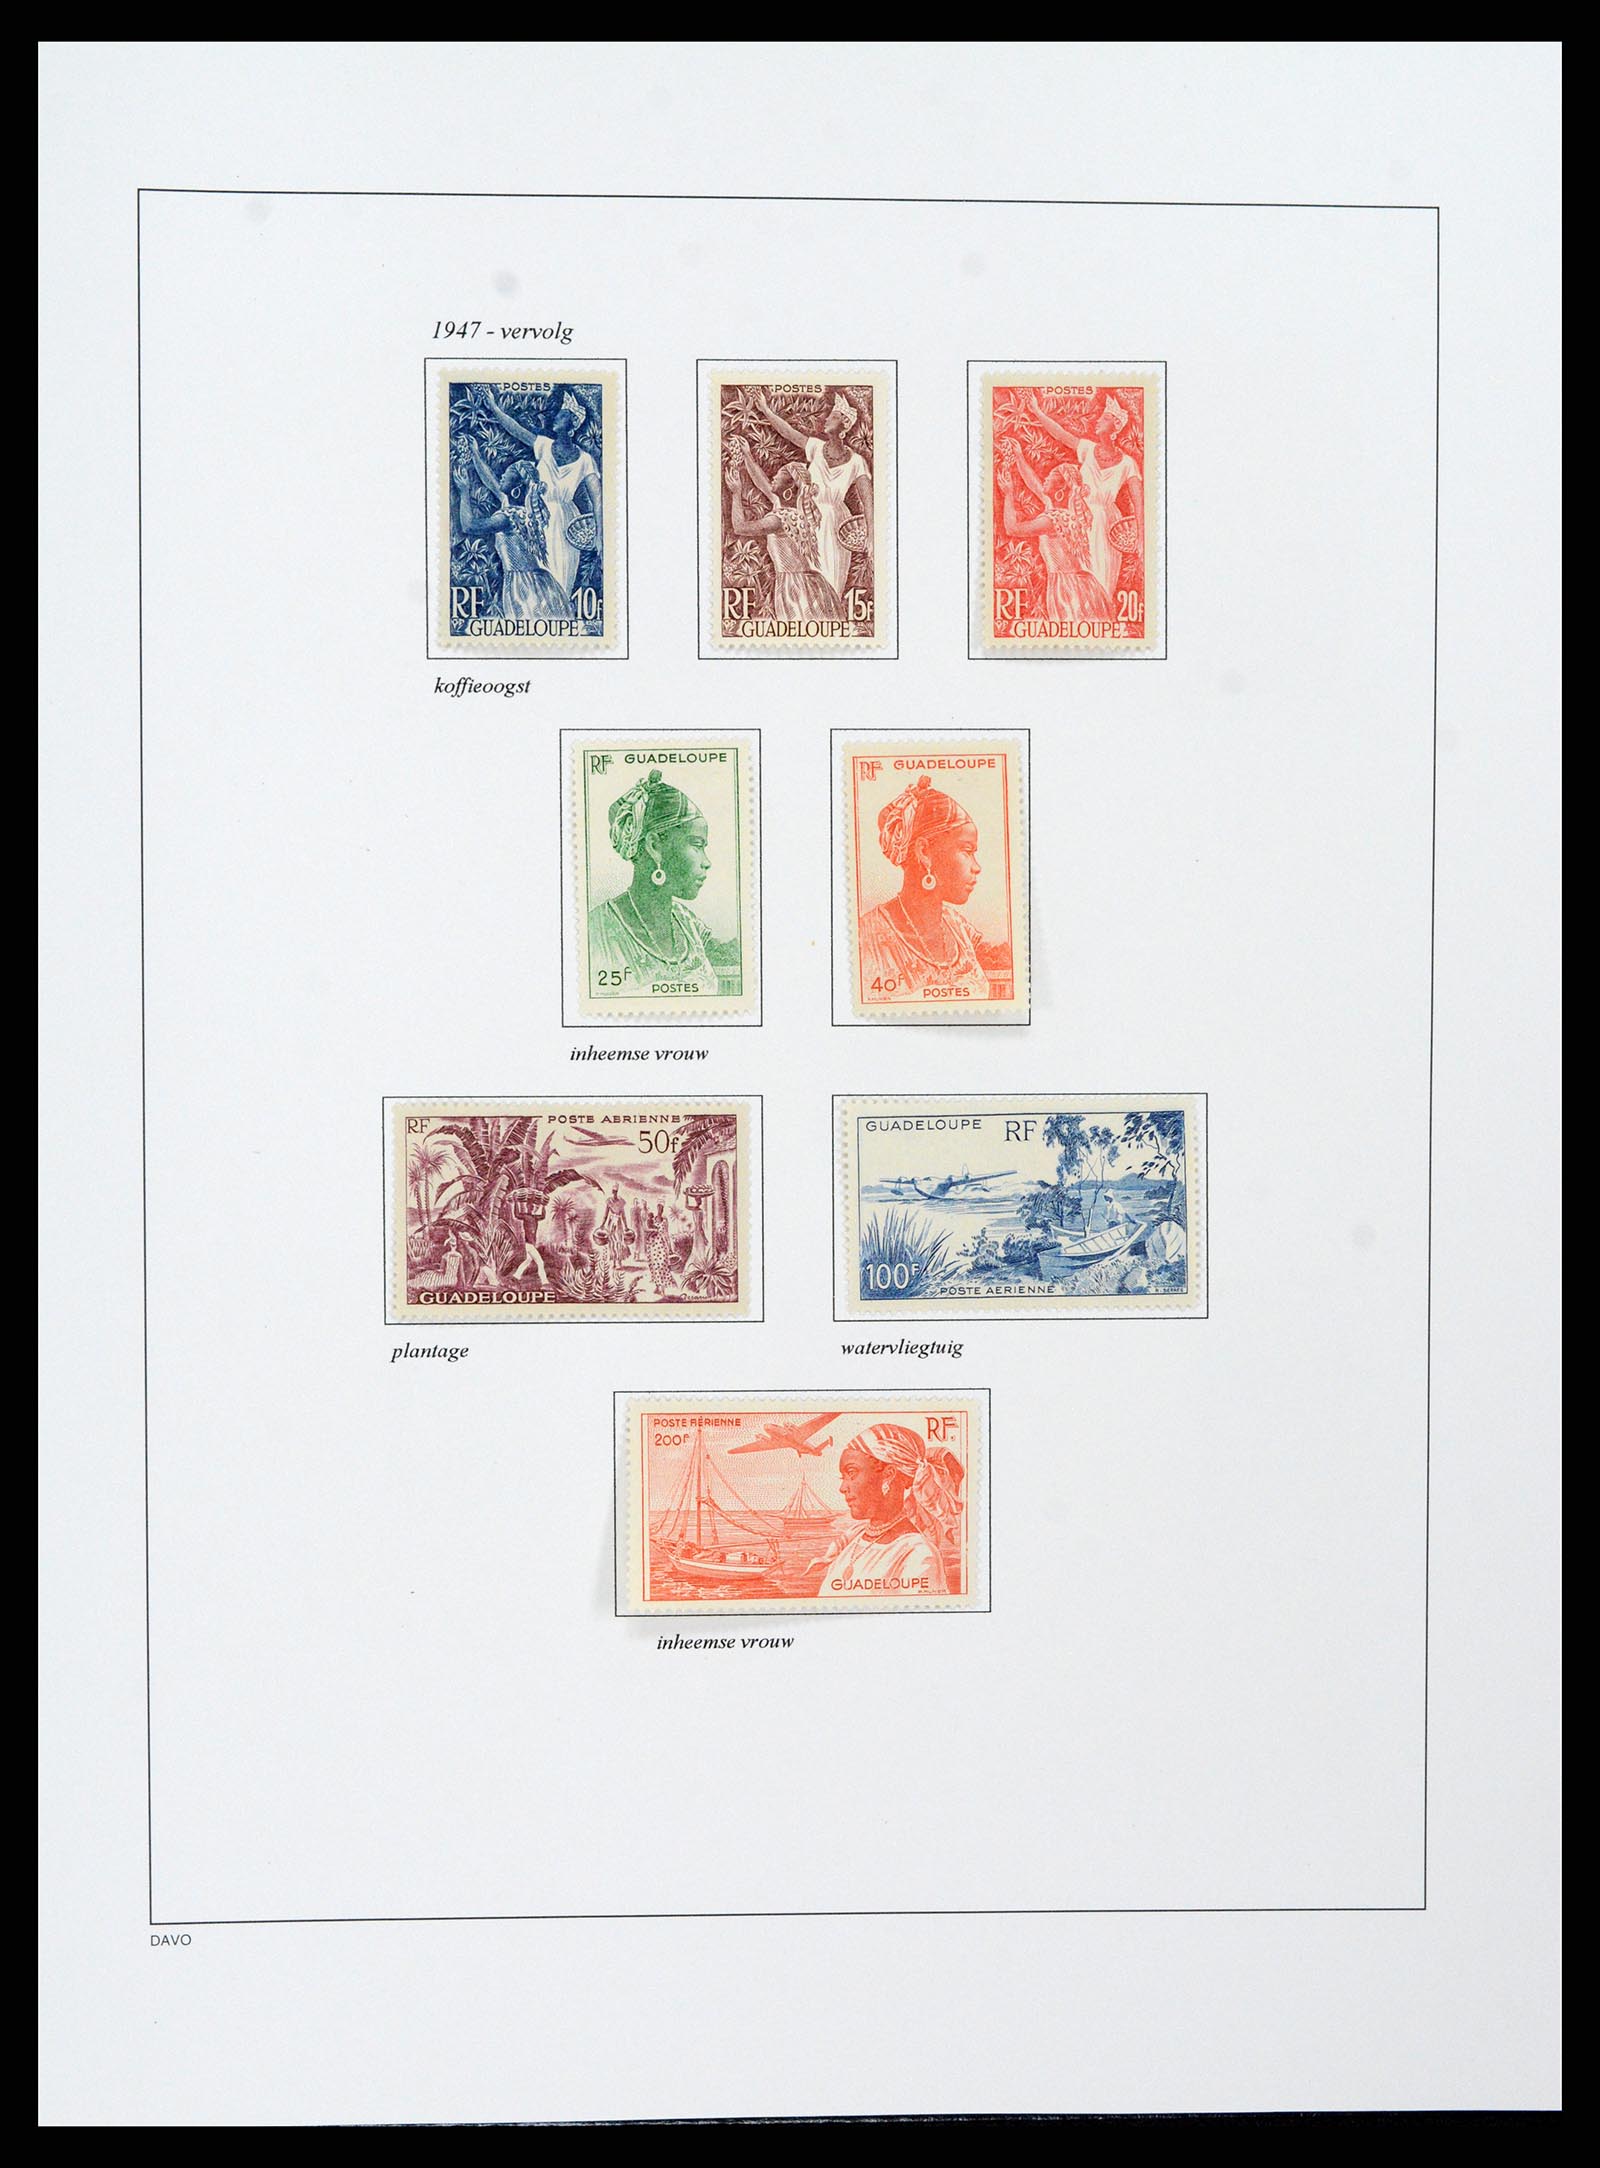 37480 080 - Stamp collection 37480 Guadeloupe supercollection 1823-1947.